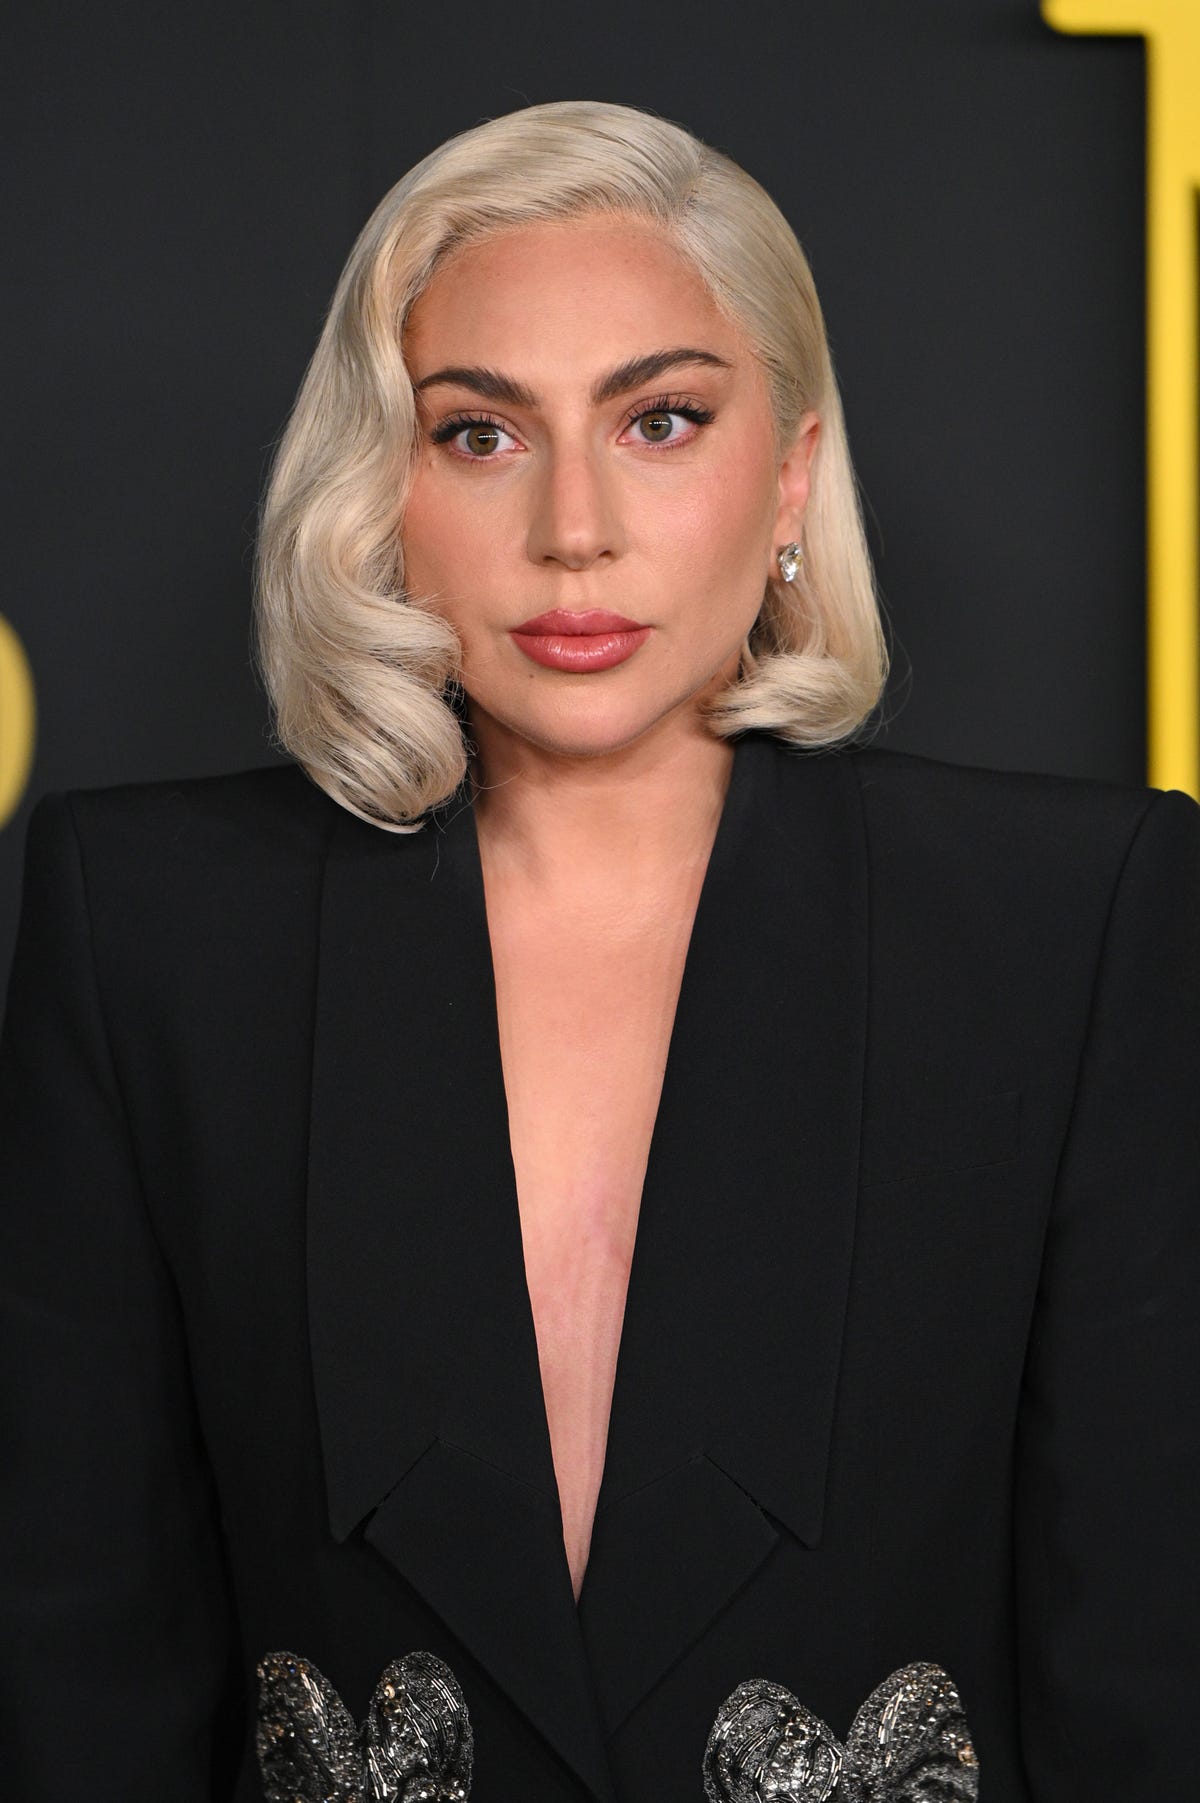 Naked brows are back c/o Lady Gaga's transformative new selfie